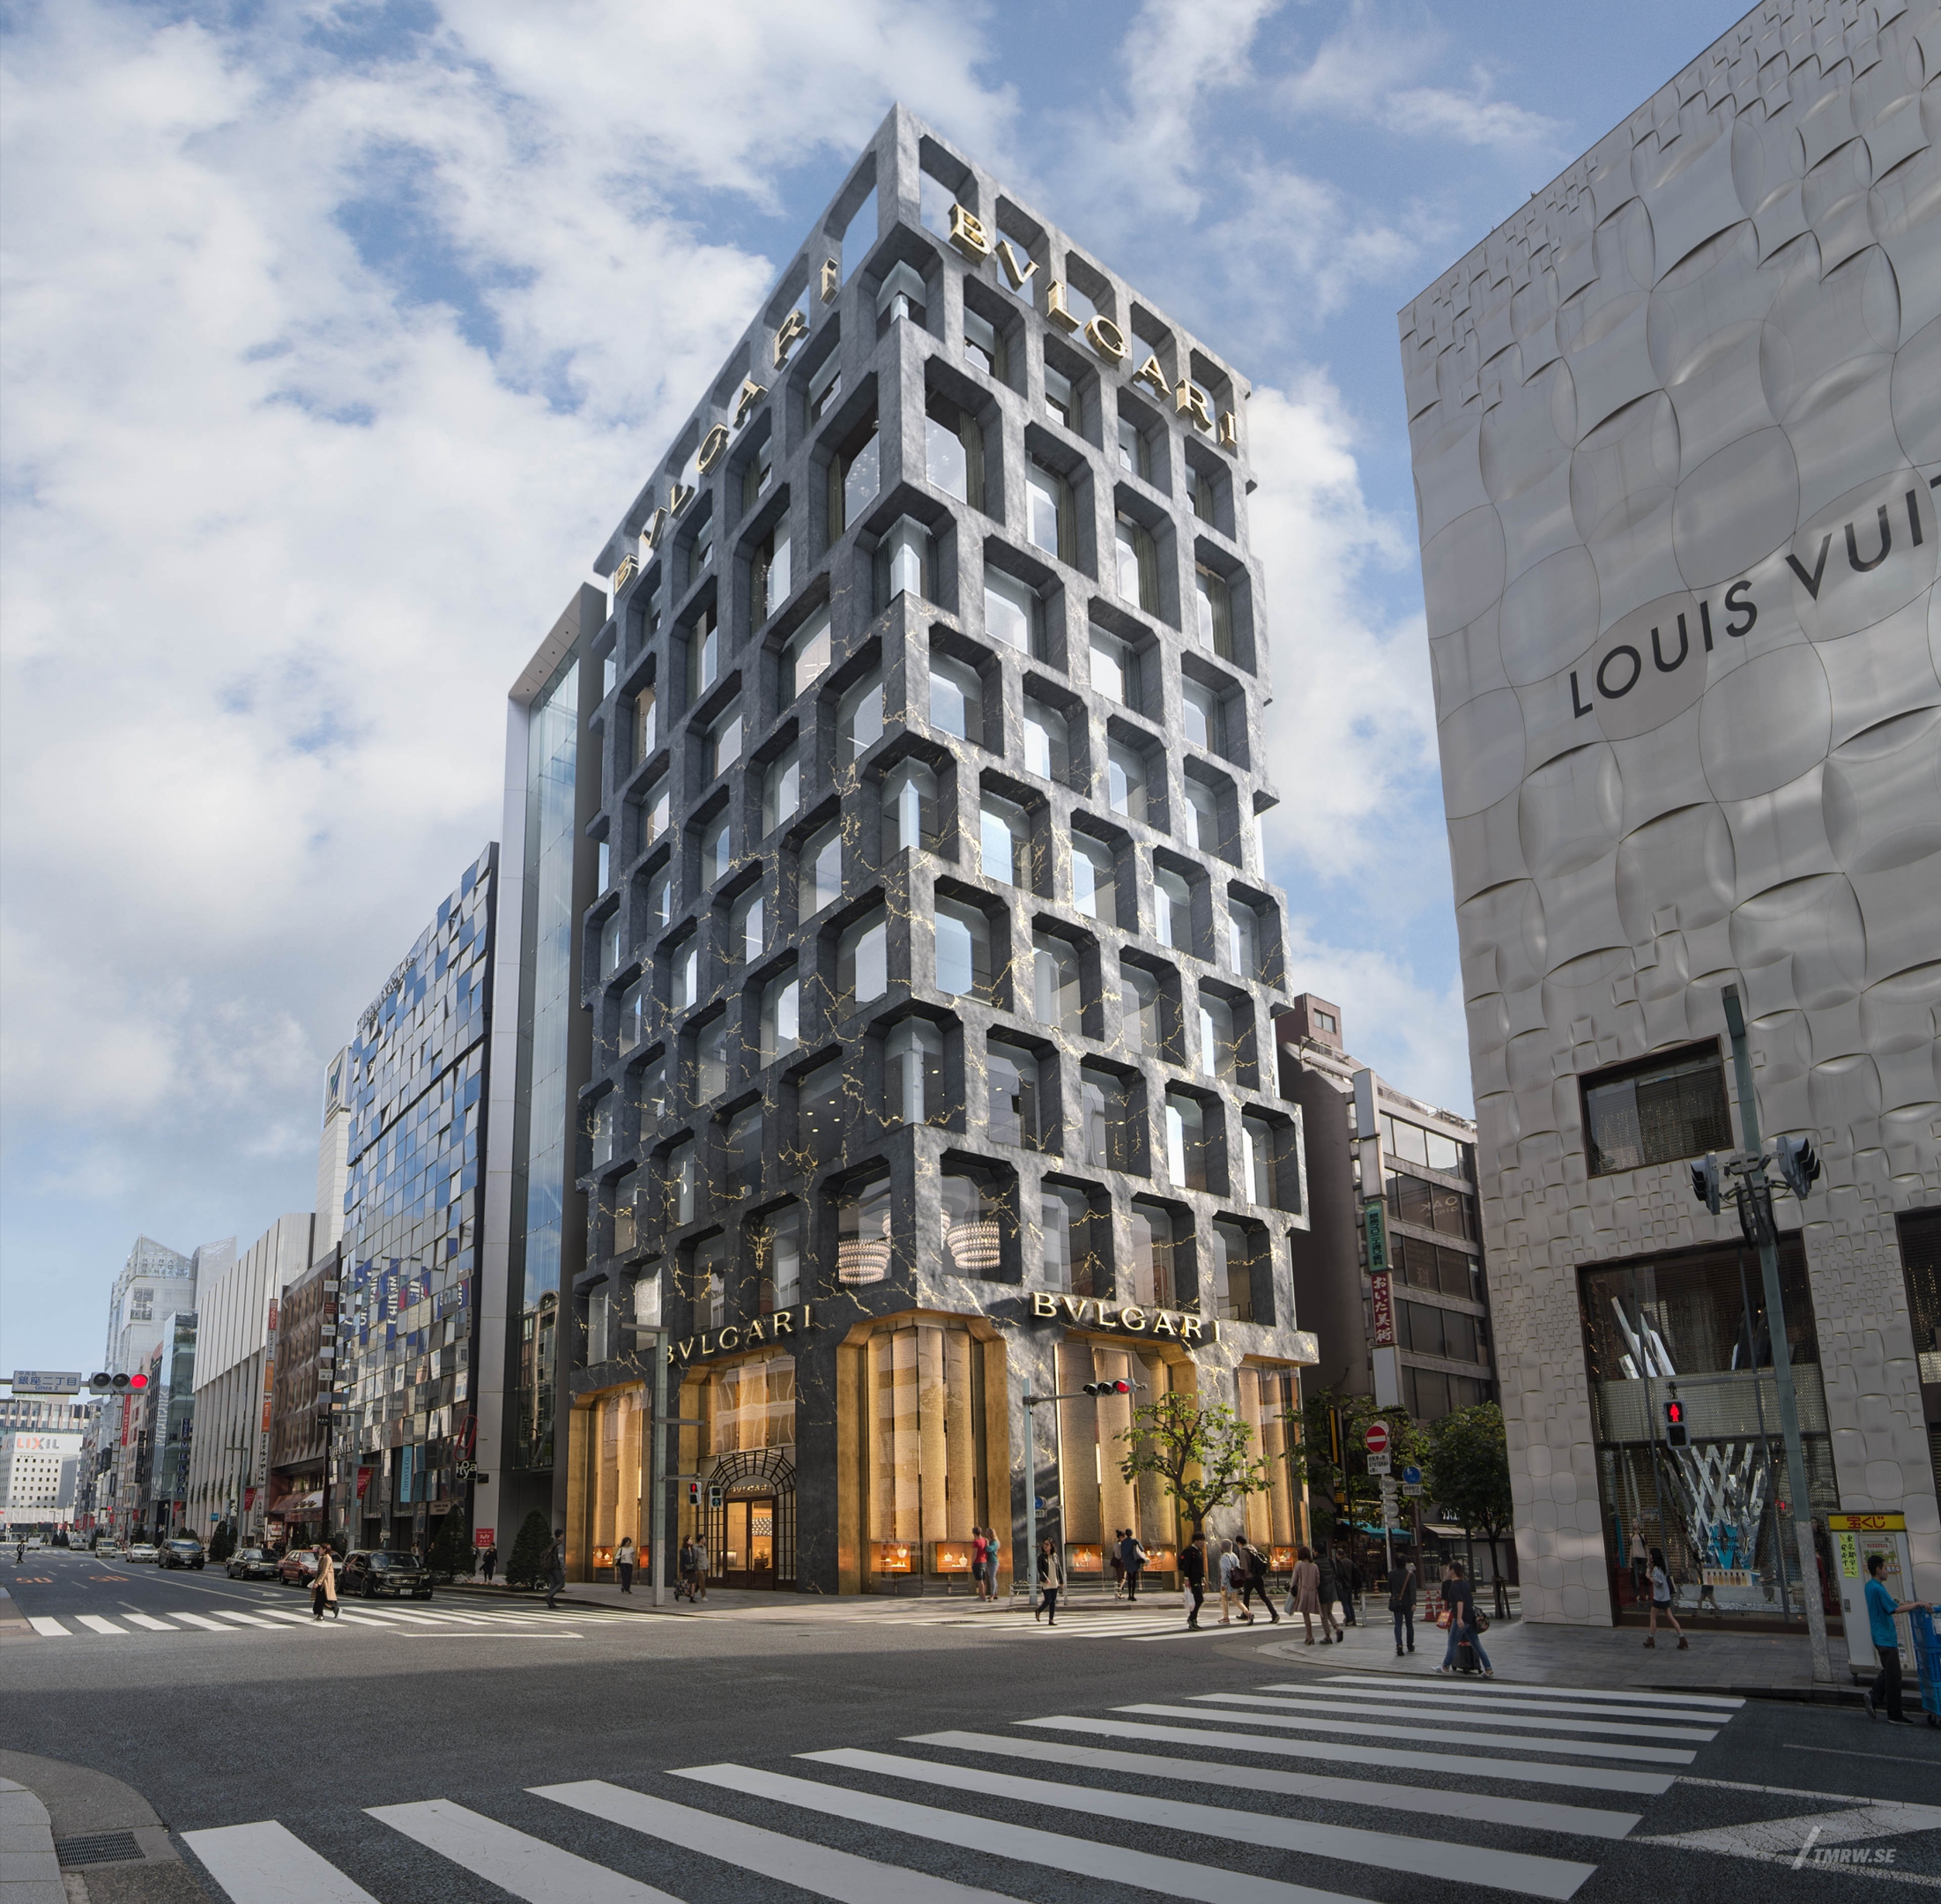 Architectural visualization for MVRDV a store building in day light form a street view.